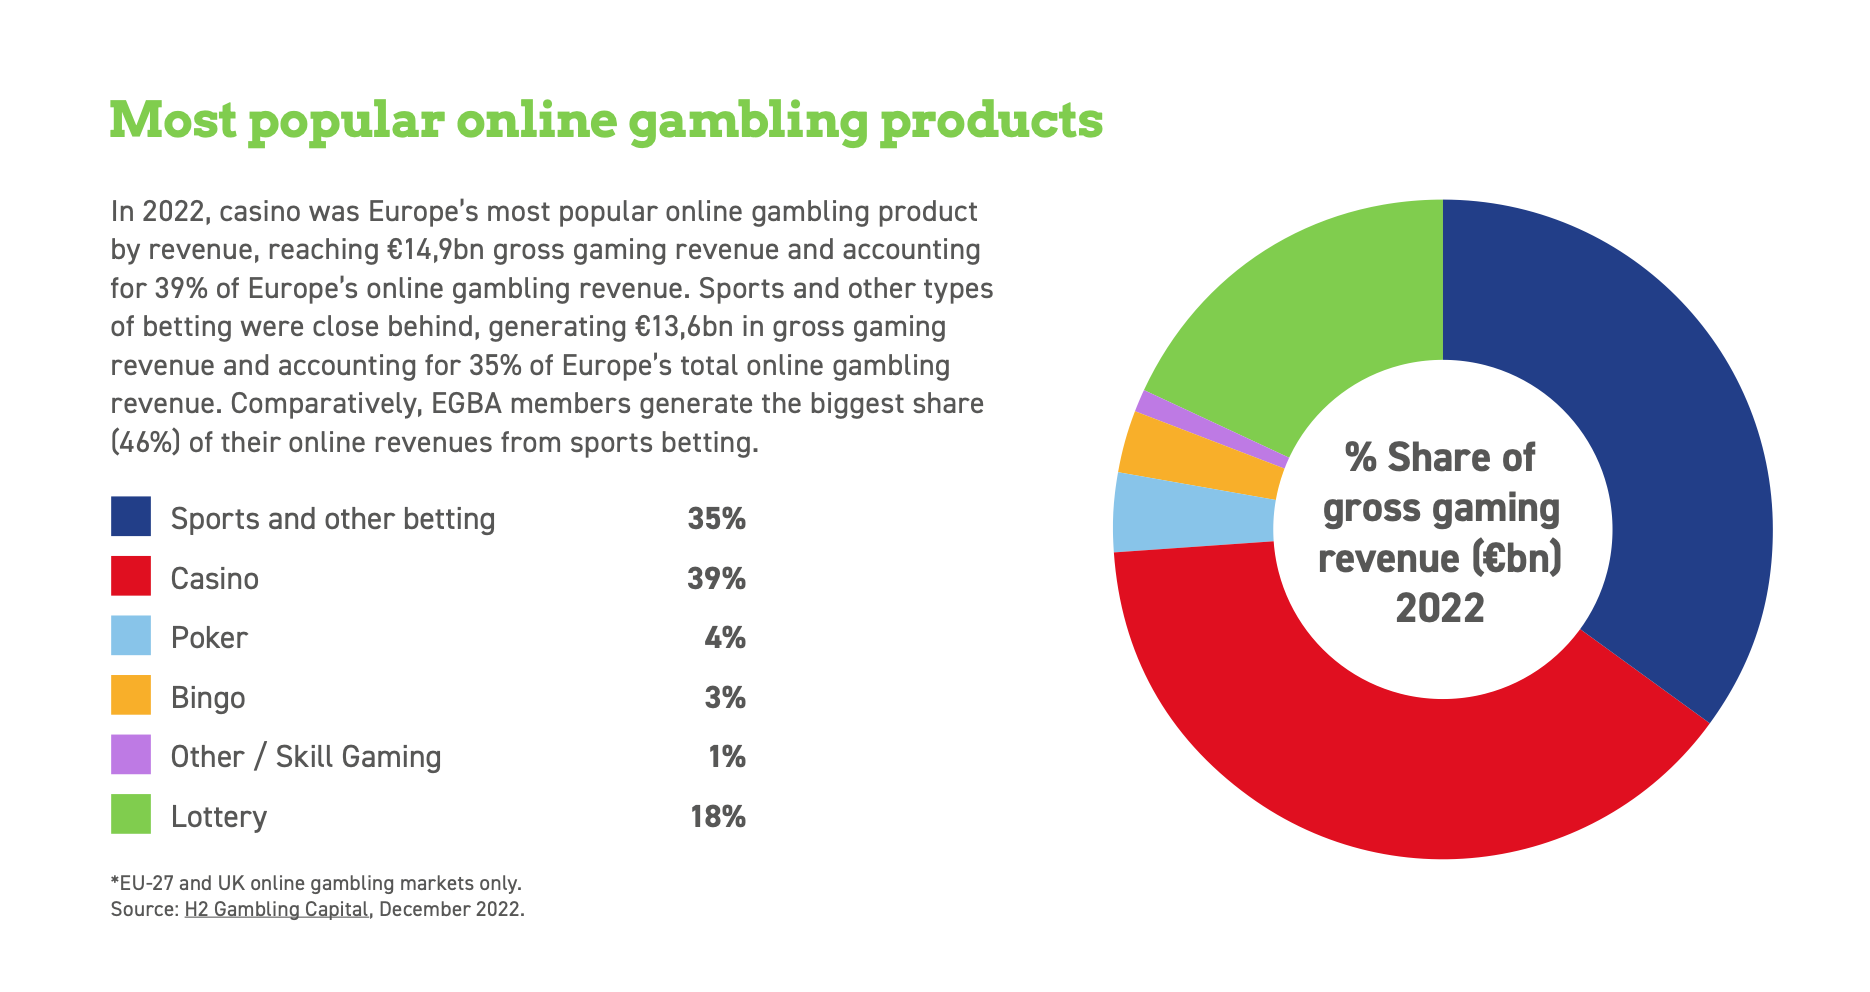 Most popular online gambling products in Europe (2022)